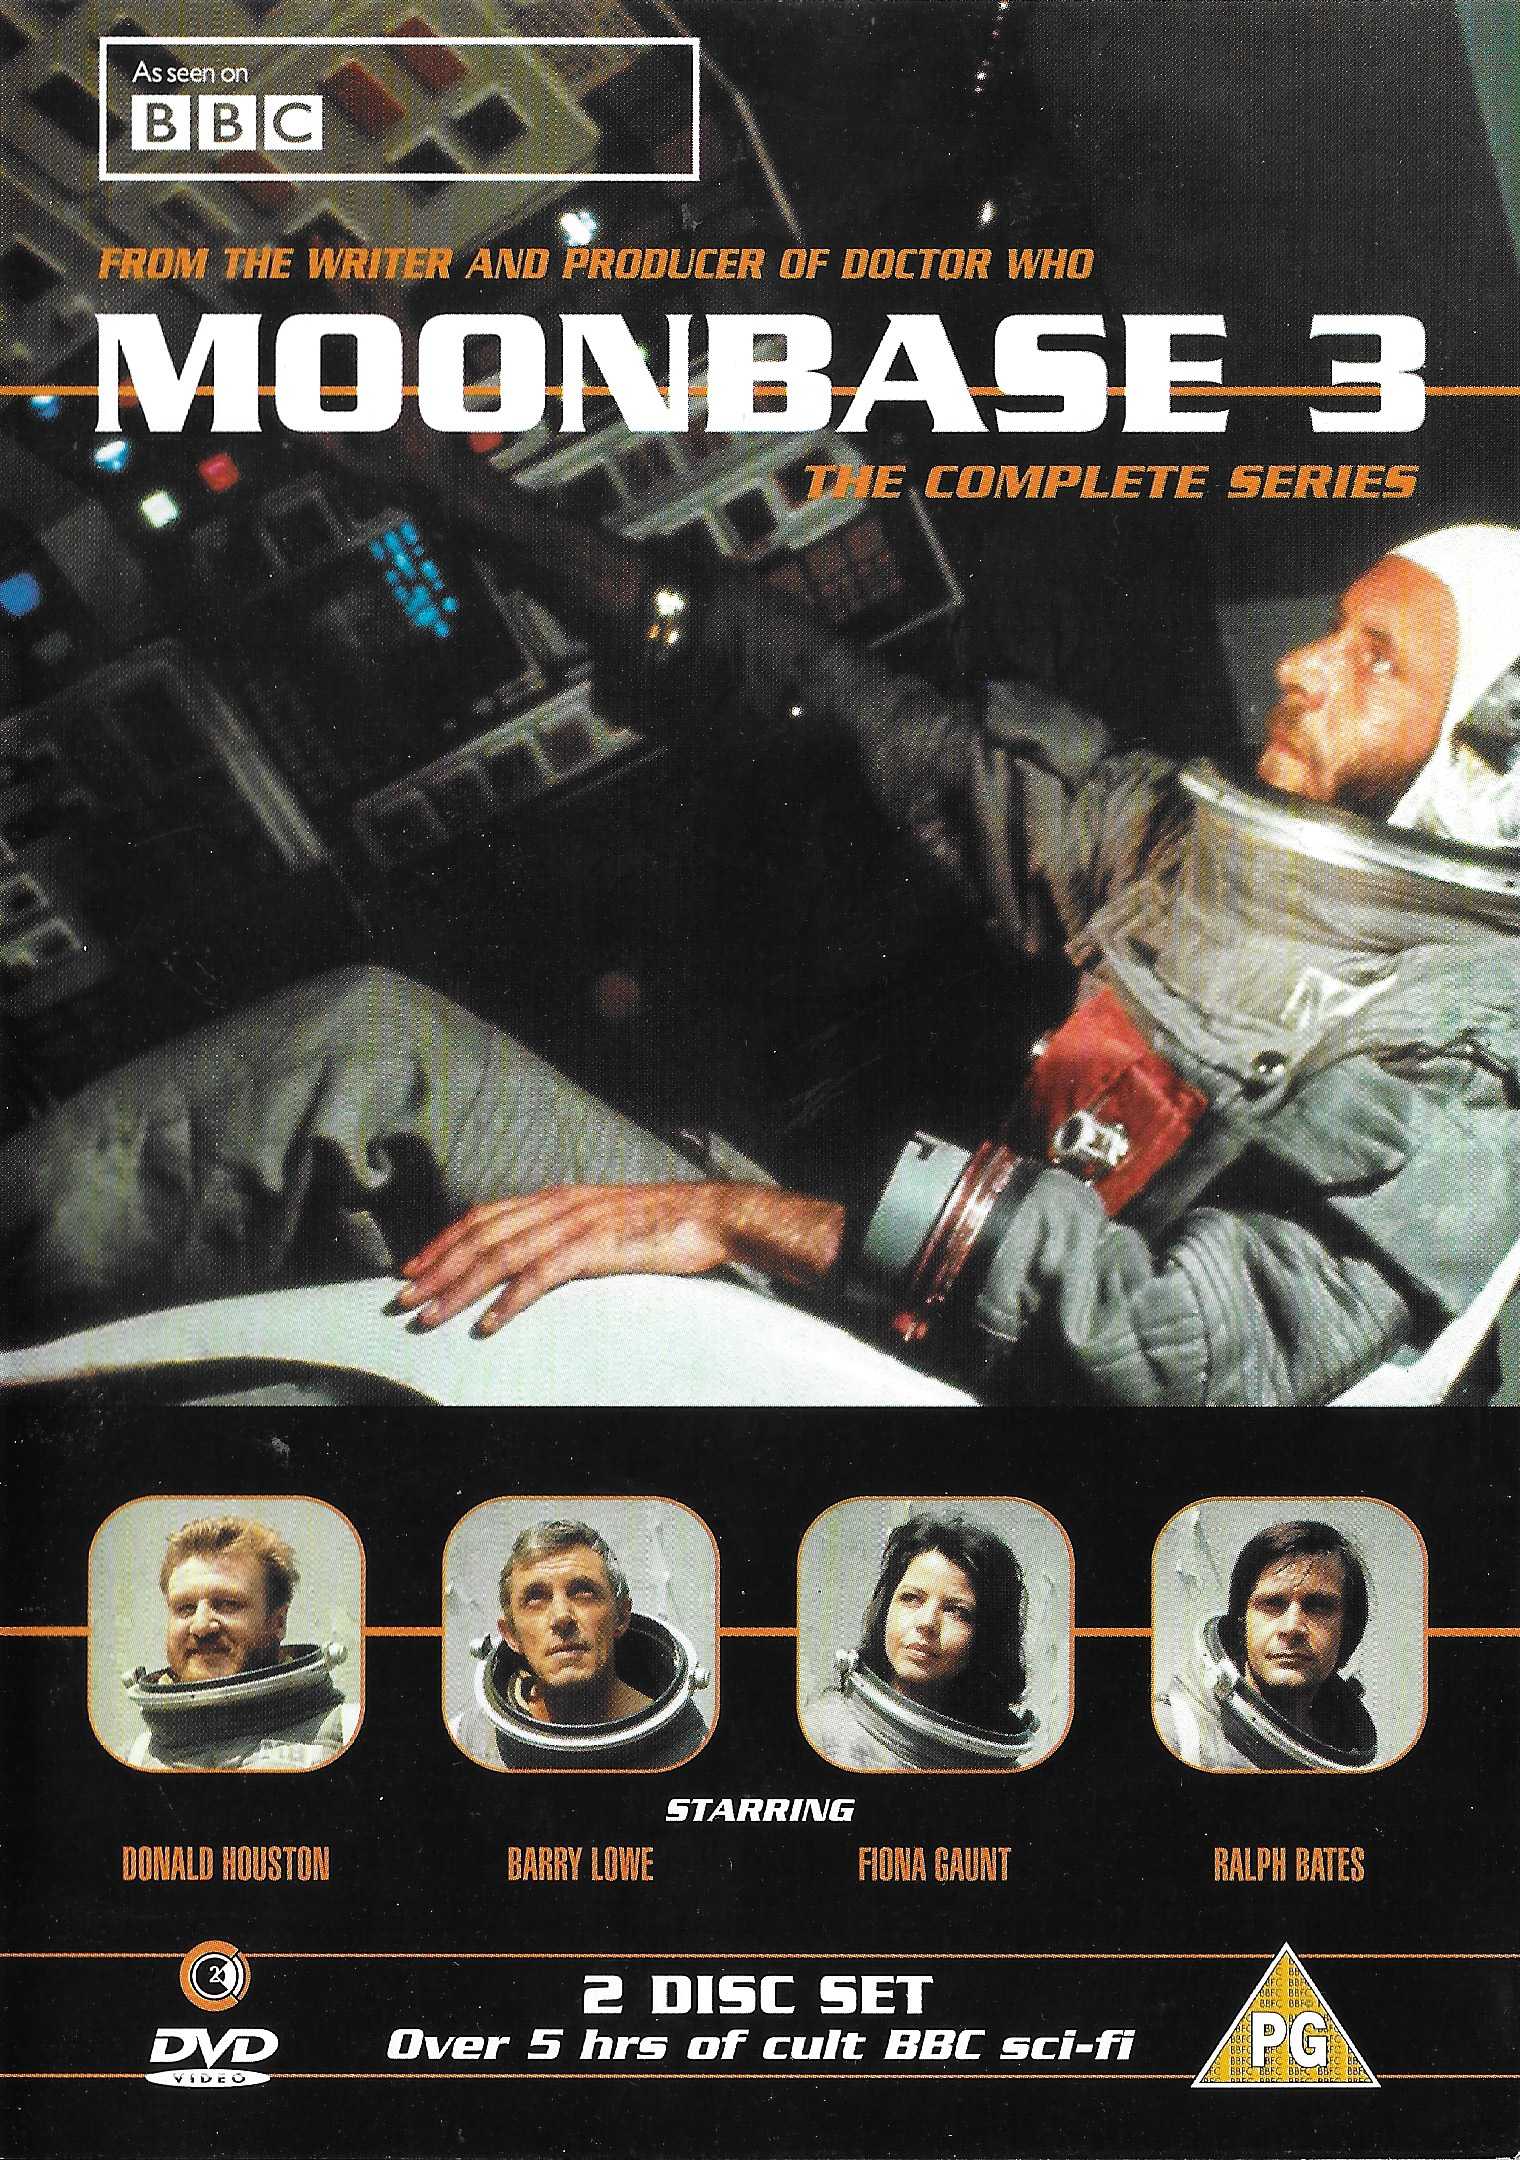 Picture of Moonbase 3 by artist Terrance Dicks / Barry Letts / John Brason / John Lucarotti / Arden Winch from the BBC dvds - Records and Tapes library